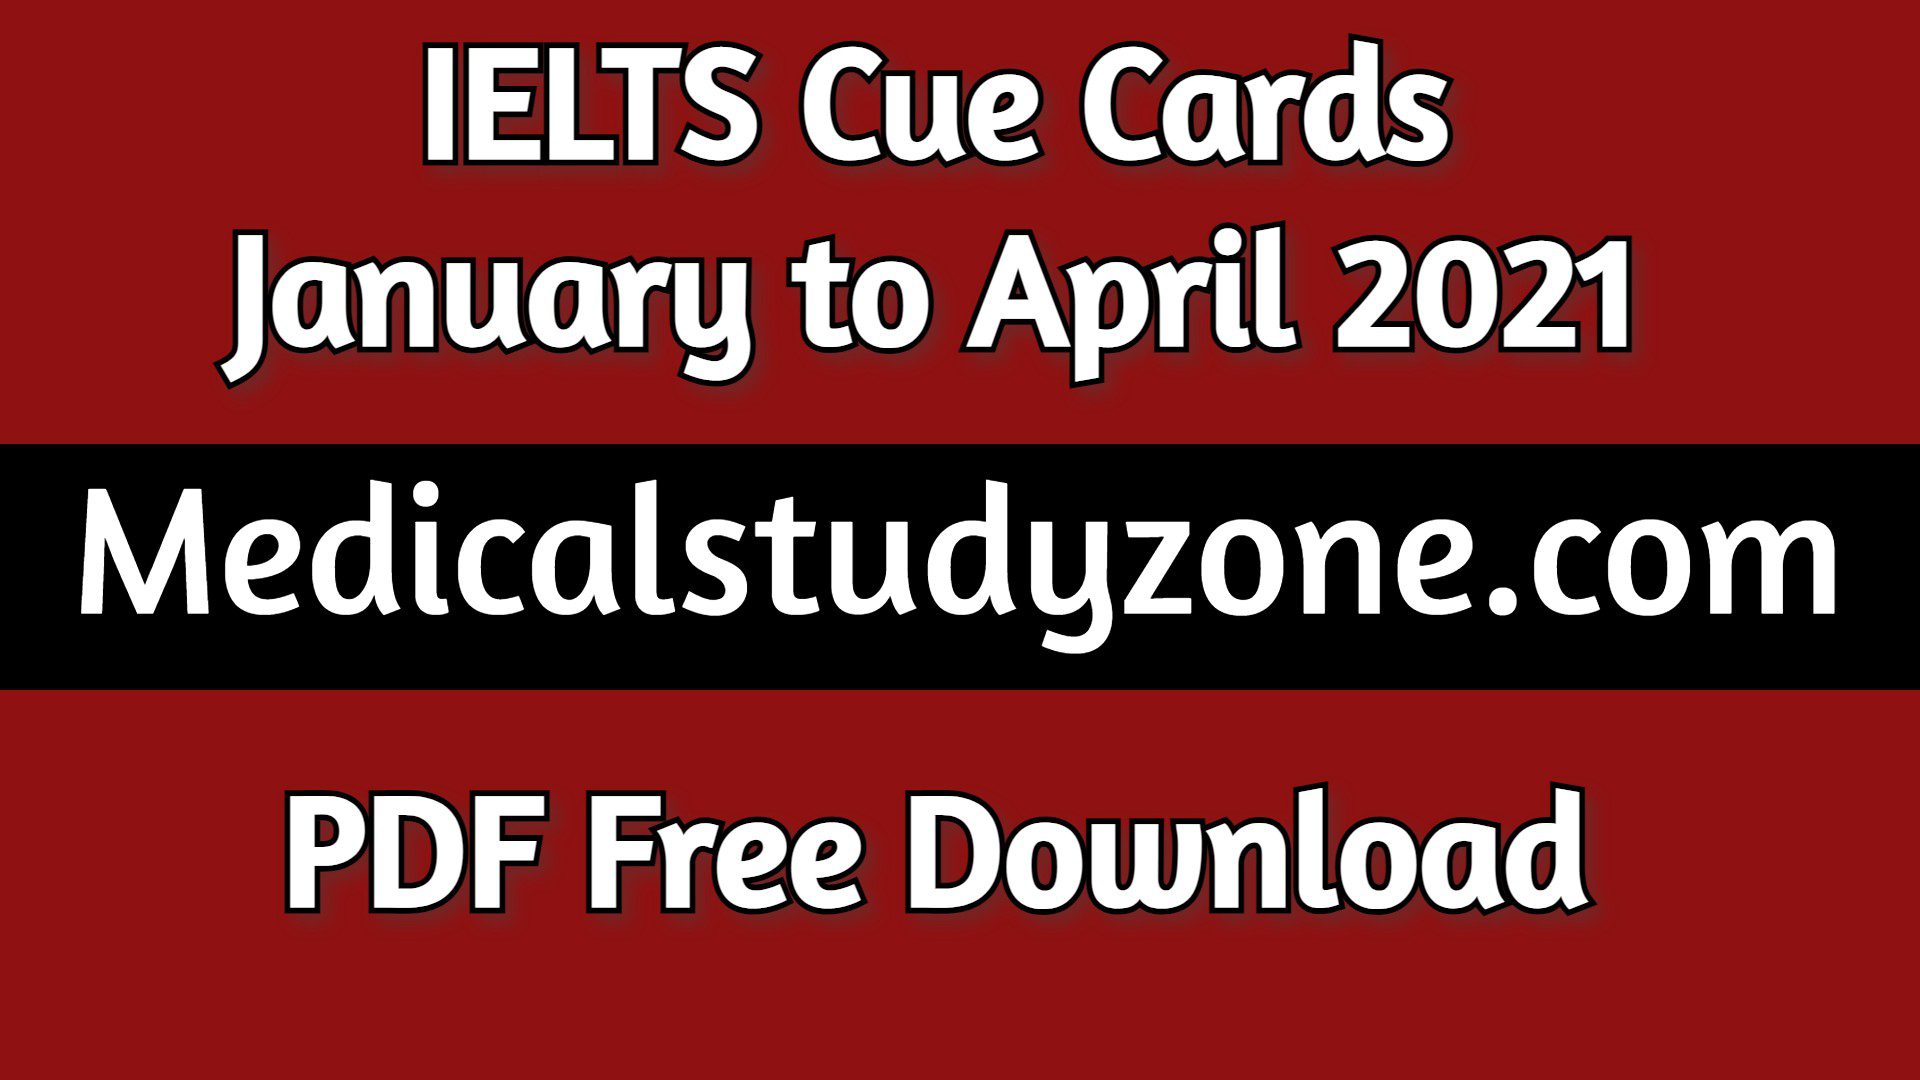 IELTS Cue Cards January to April 2021 PDF Free Download